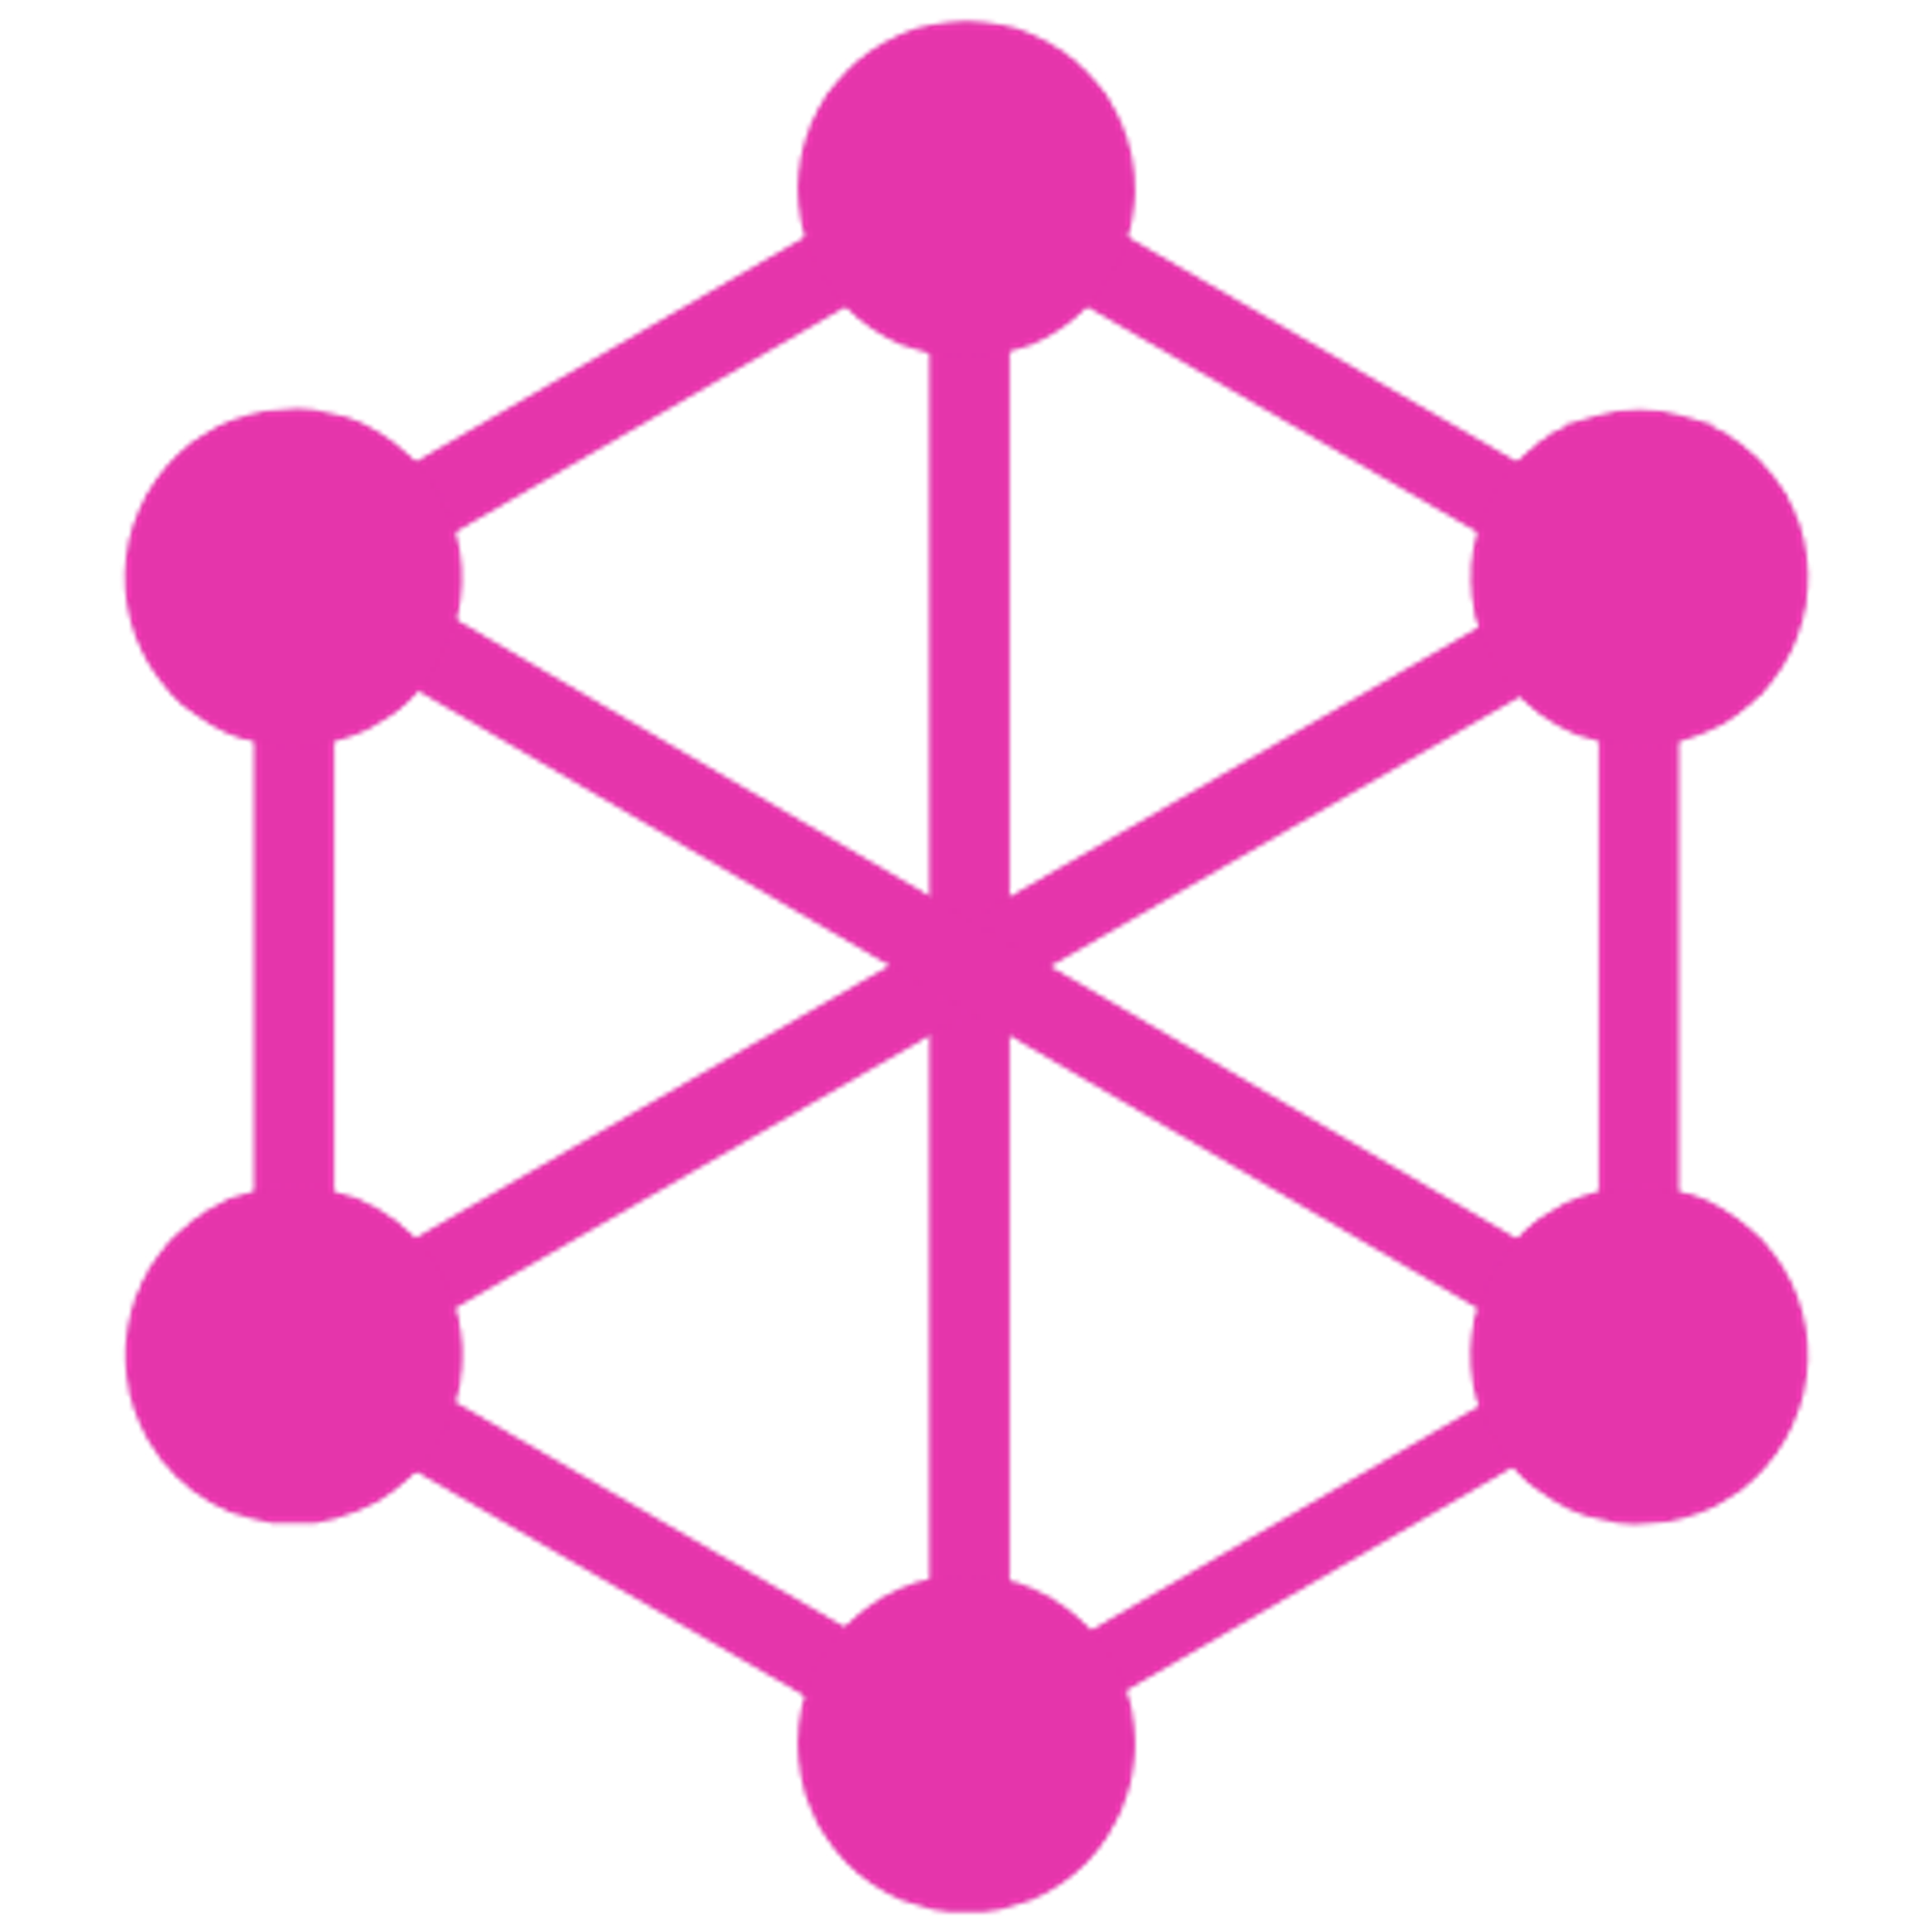 Production-ready API with Go and GraphQL